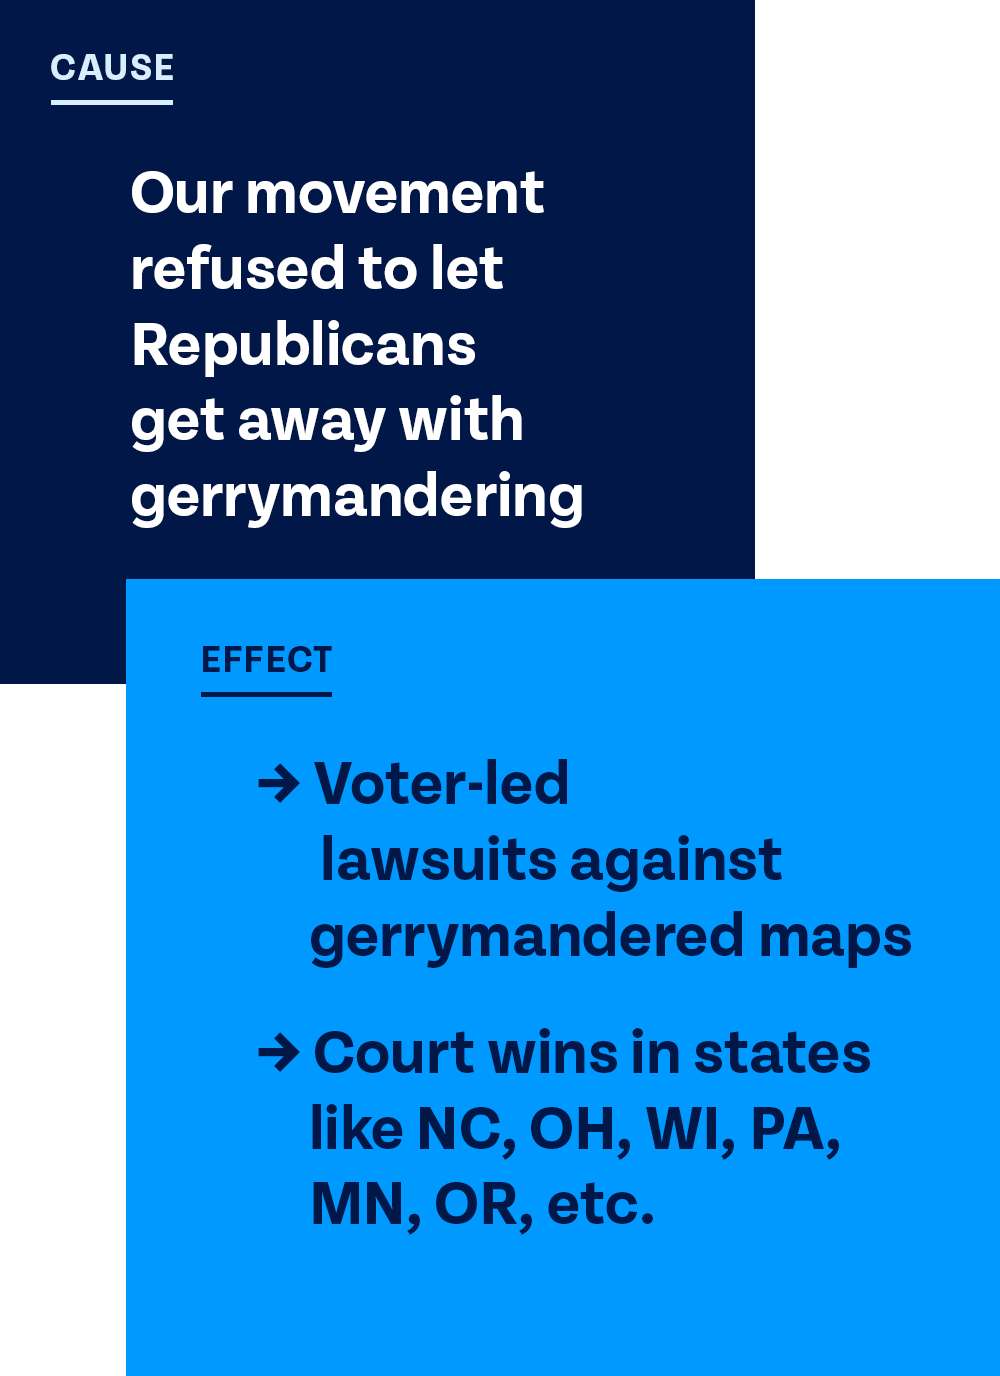 Cause: Our movement refused to let Republicans get away with gerrymandering
Effect: Voter-led lawsuits against gerrymandered maps. Court wins in states like NC, OH, WI, PA, MN, OR, etc.